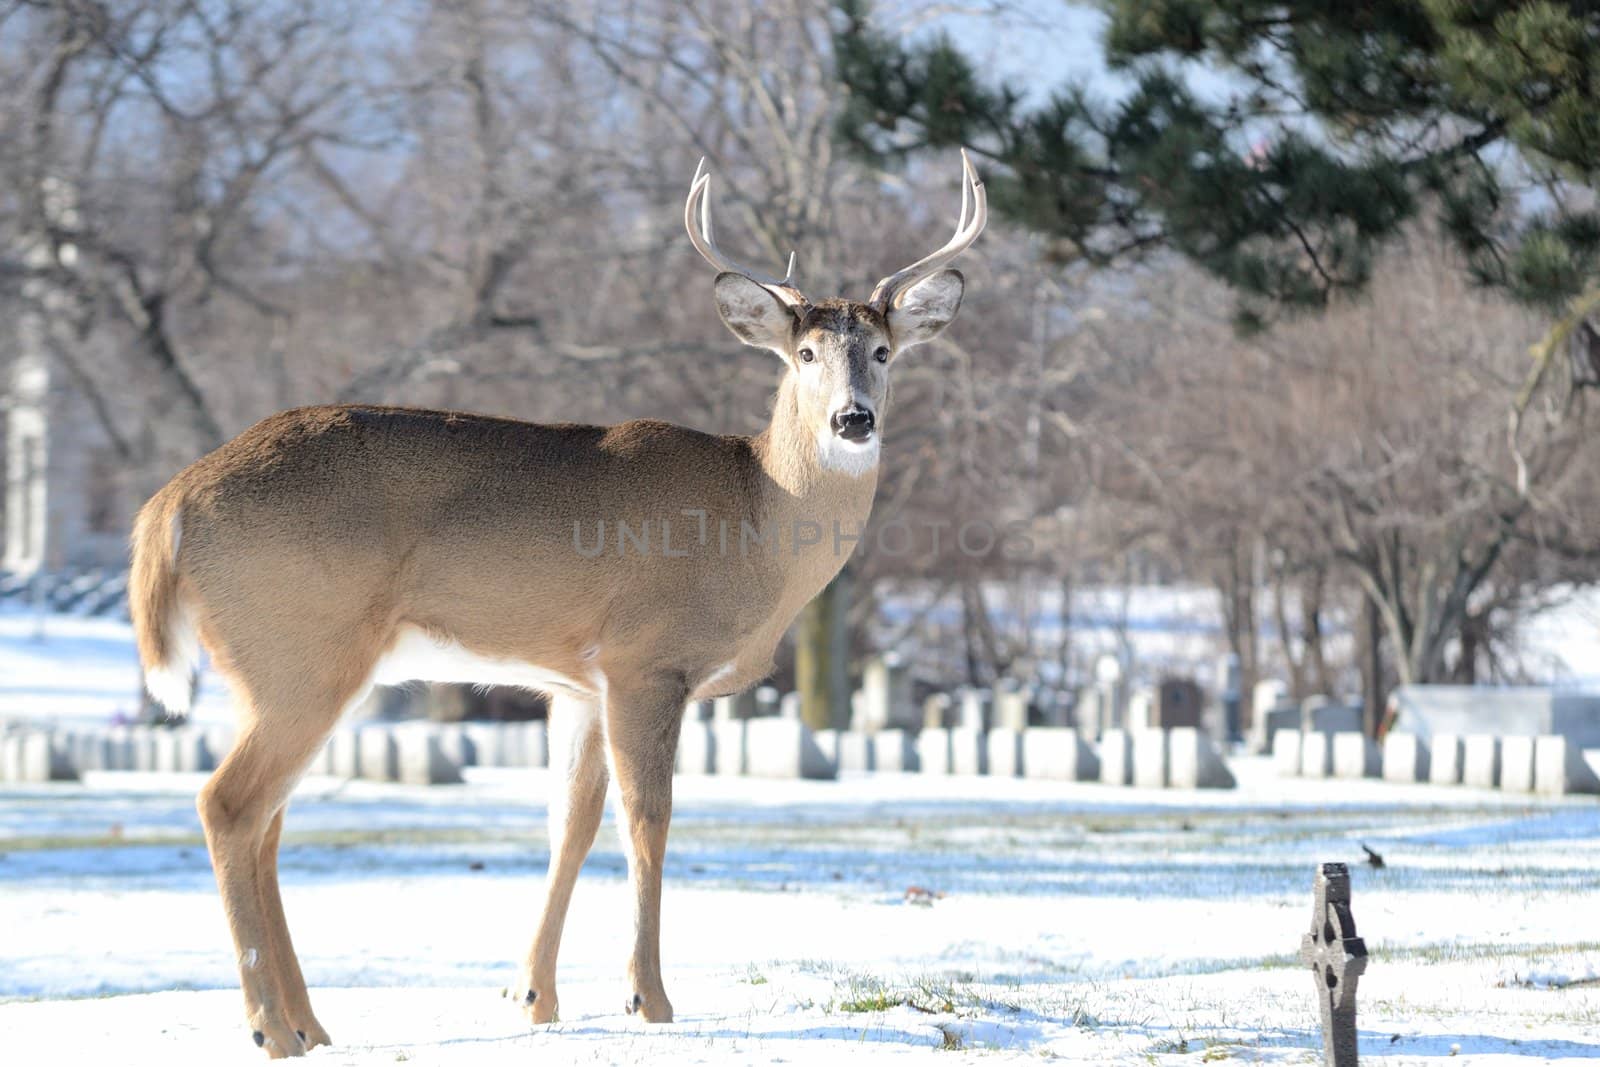 A whitetail deer buck standing in winter snow in a cemetery